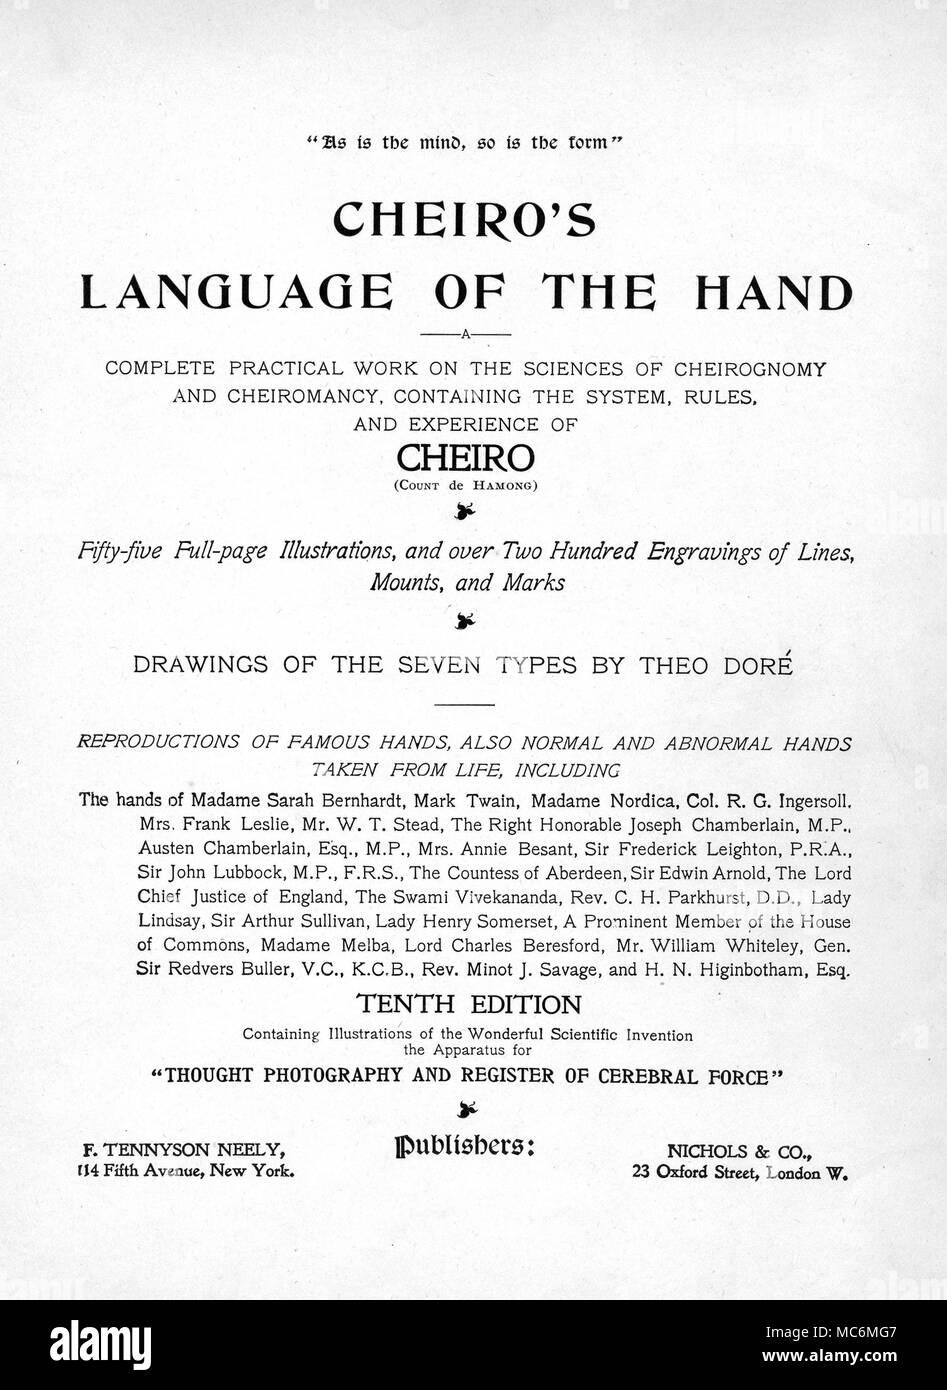 PALMISTRY Title page of the book by the palmist-clairvoyant, Louis Hamon (who wrote under the name of Cheiro: Cheiro's Language of the Hand, 1897. This edition contained the hands of some of the most important politicians and artists of the day (as may be seen from the advertisement on the title-page). Stock Photo